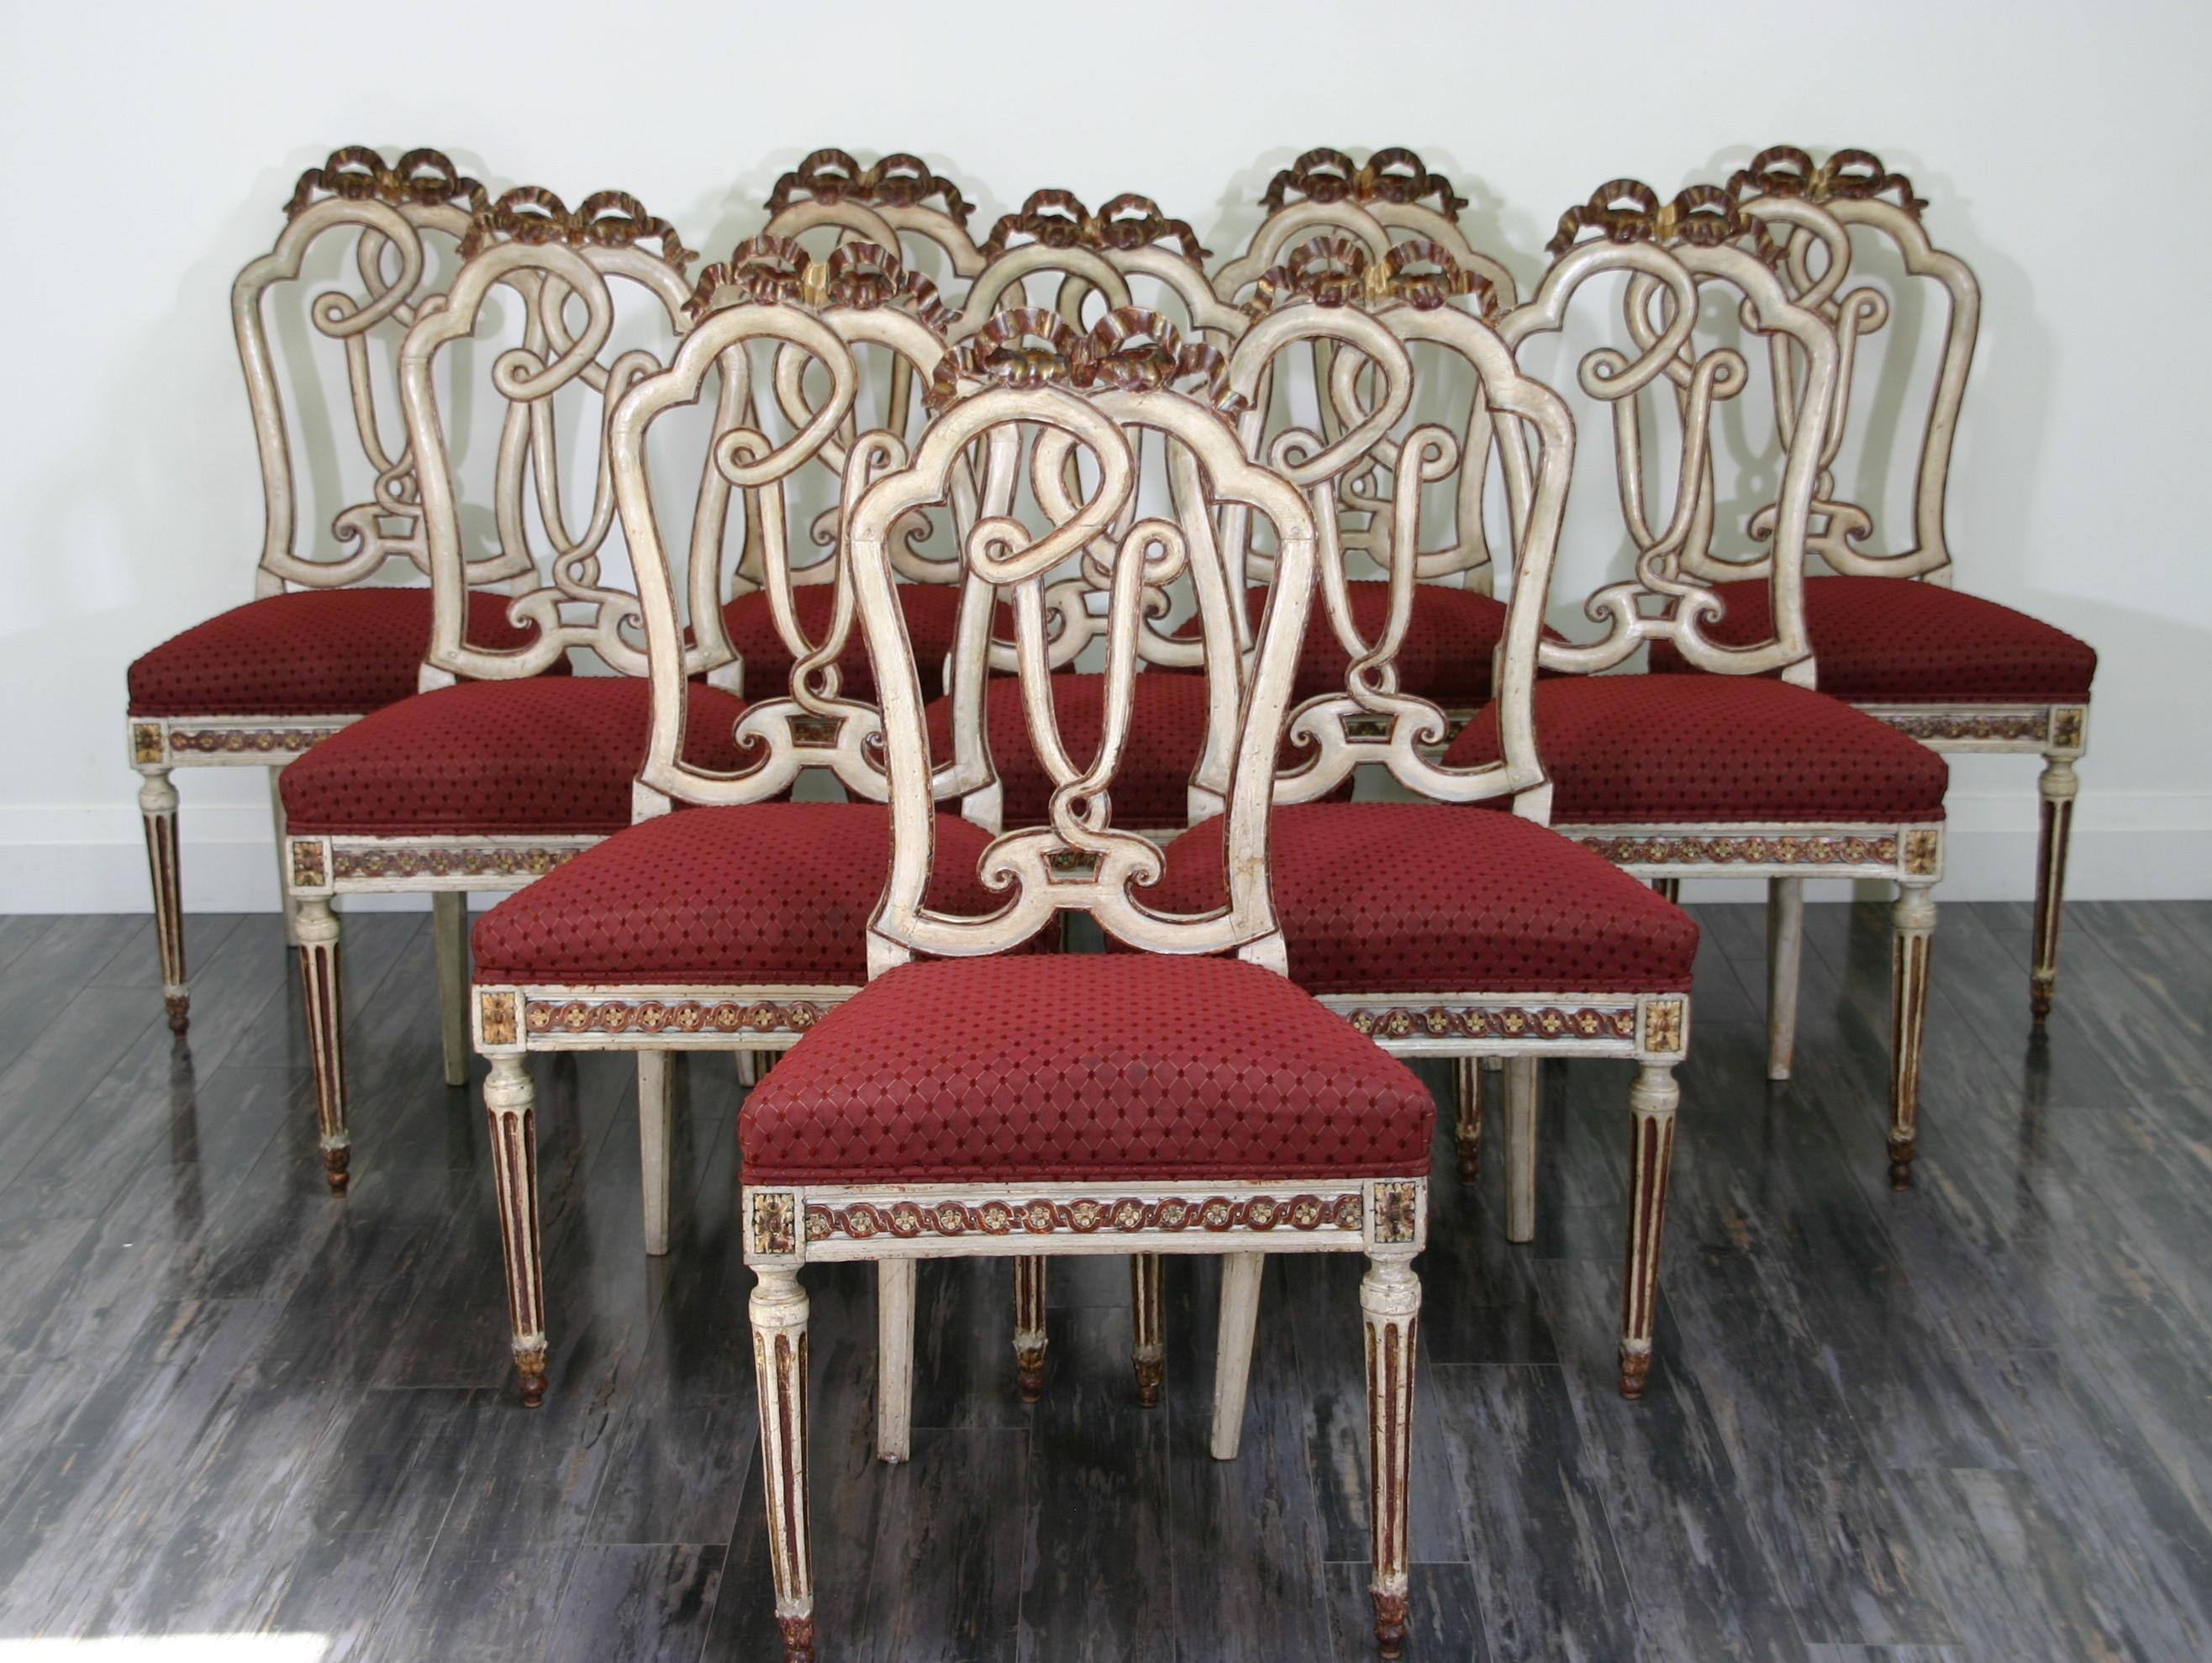 Set of 10 Italian Venetian (18th Century) painted and gilt trimmed side chairs with open carved backs and red upholstered seats supported by fluted legs. (PRICED AS SET)
